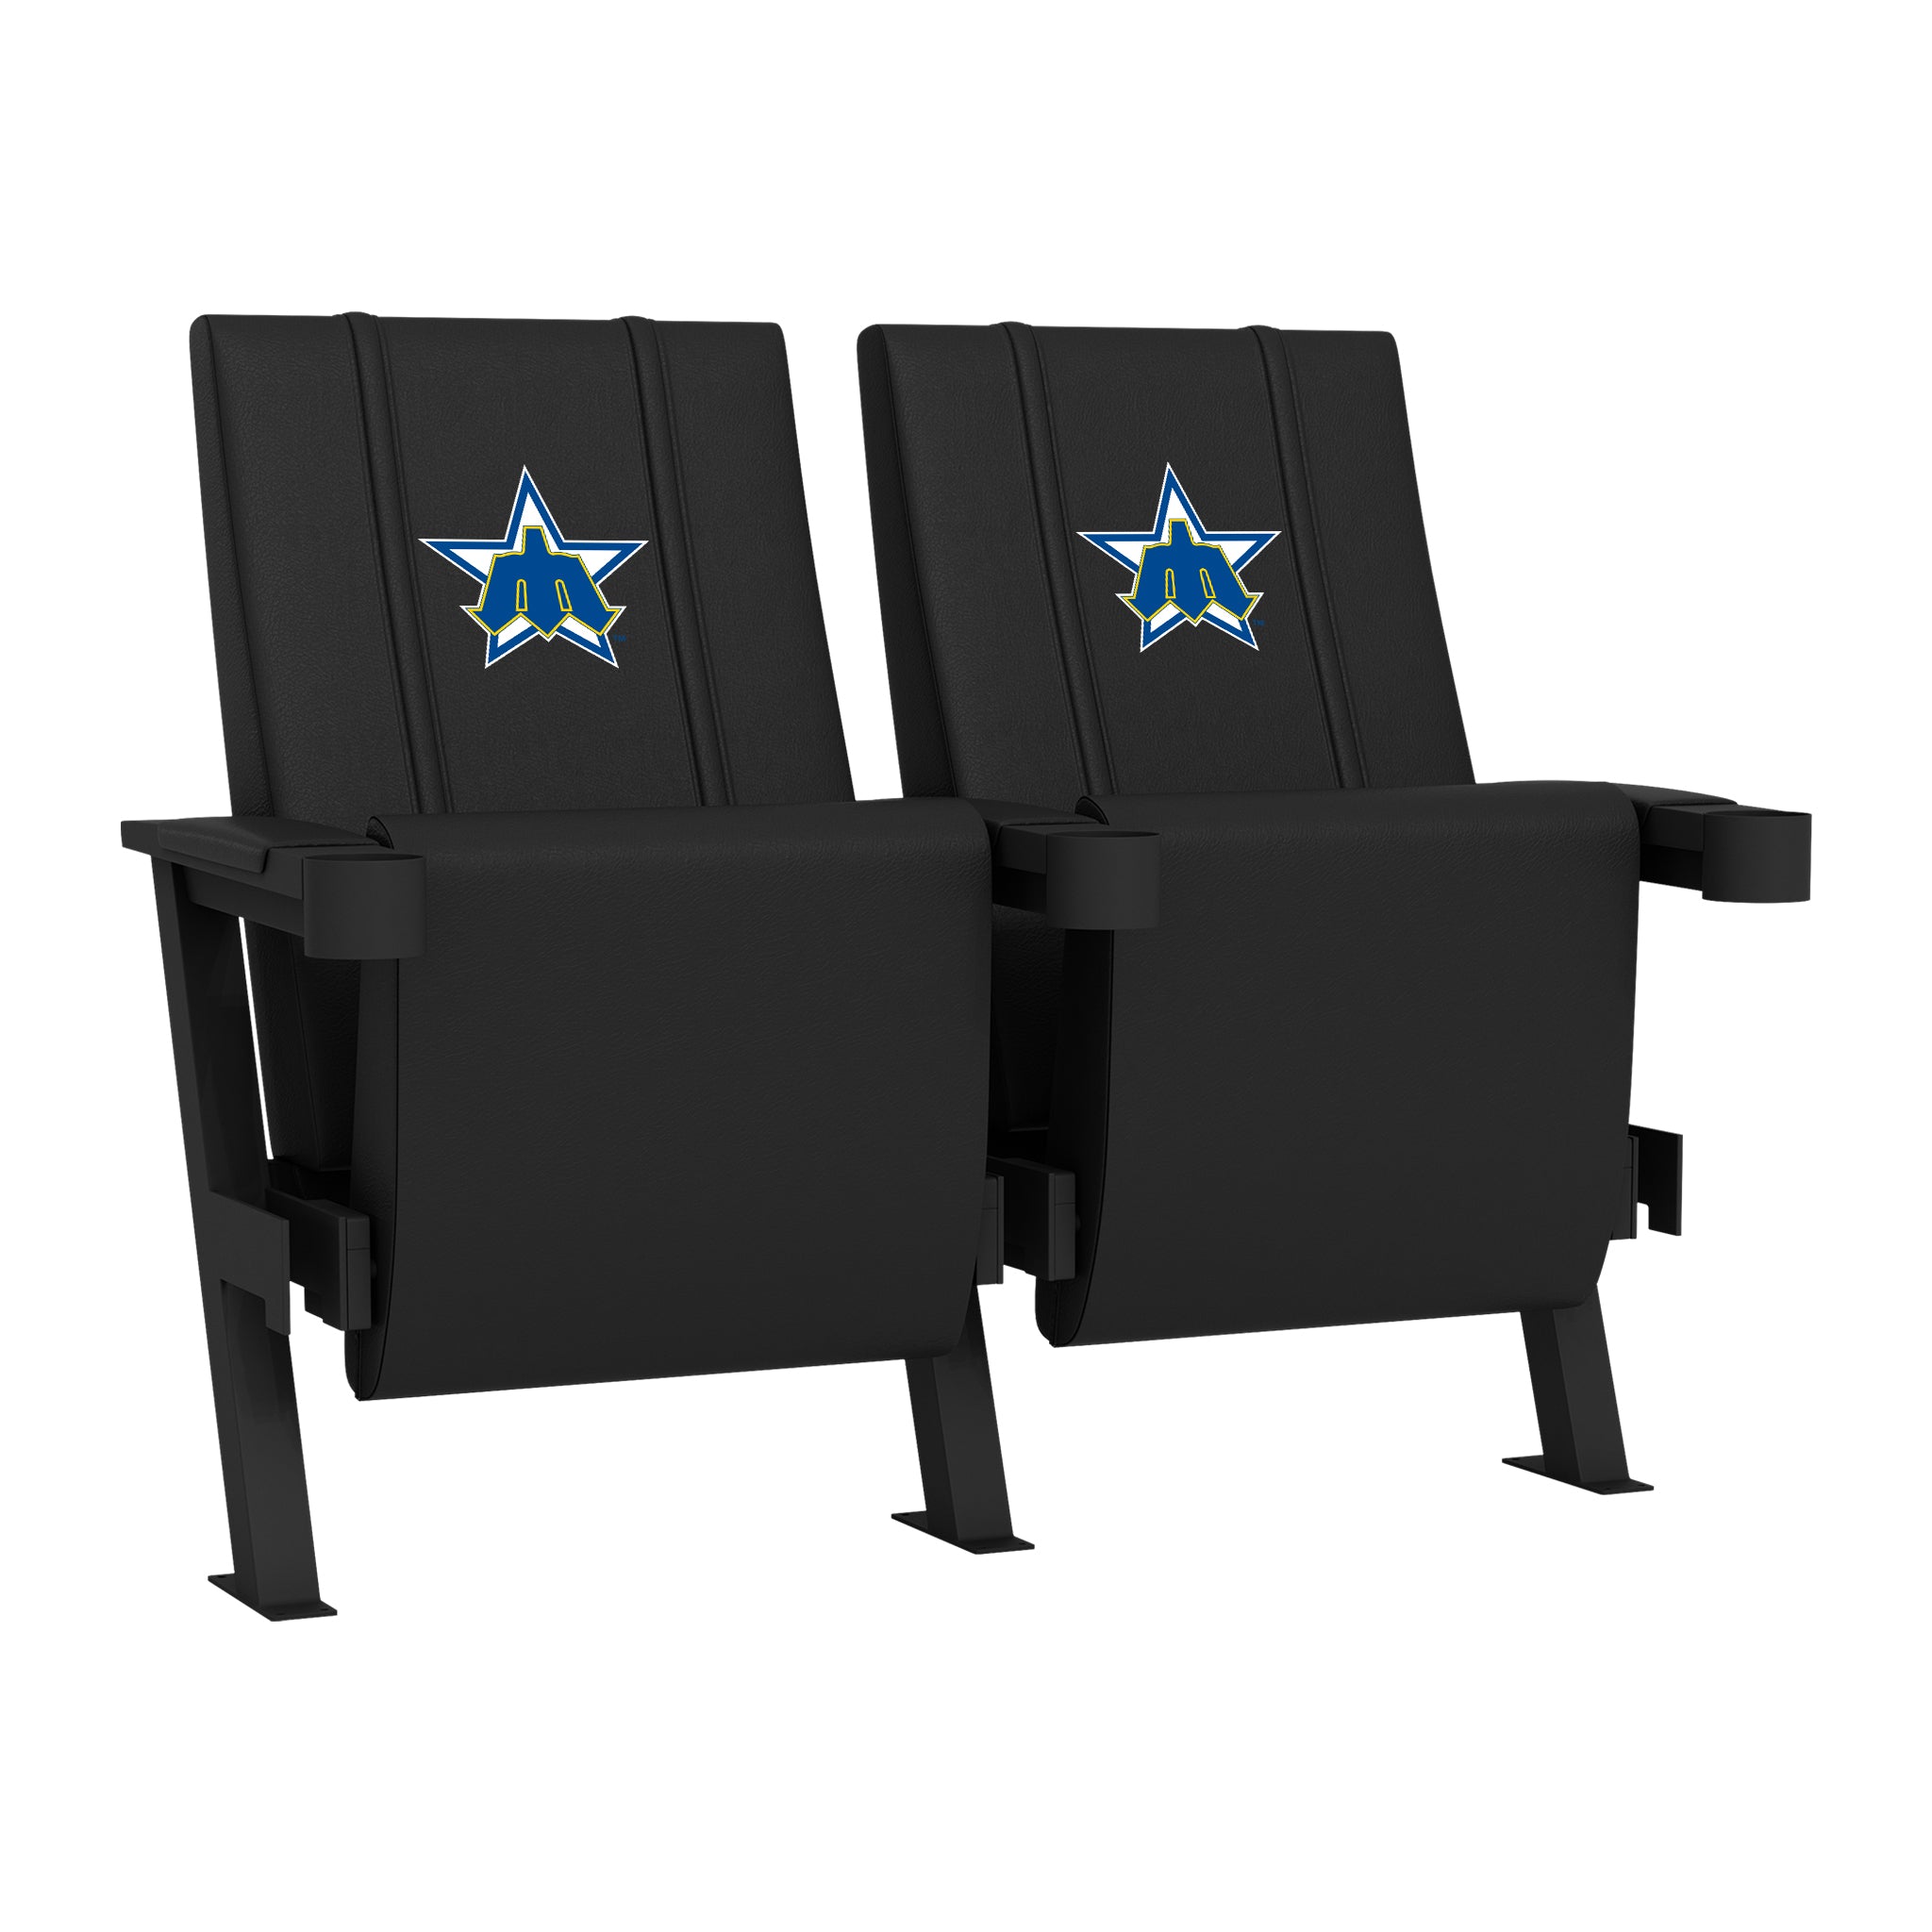 SuiteMax 3.5 VIP Seats with Seattle Mariners Cooperstown Primary Logo